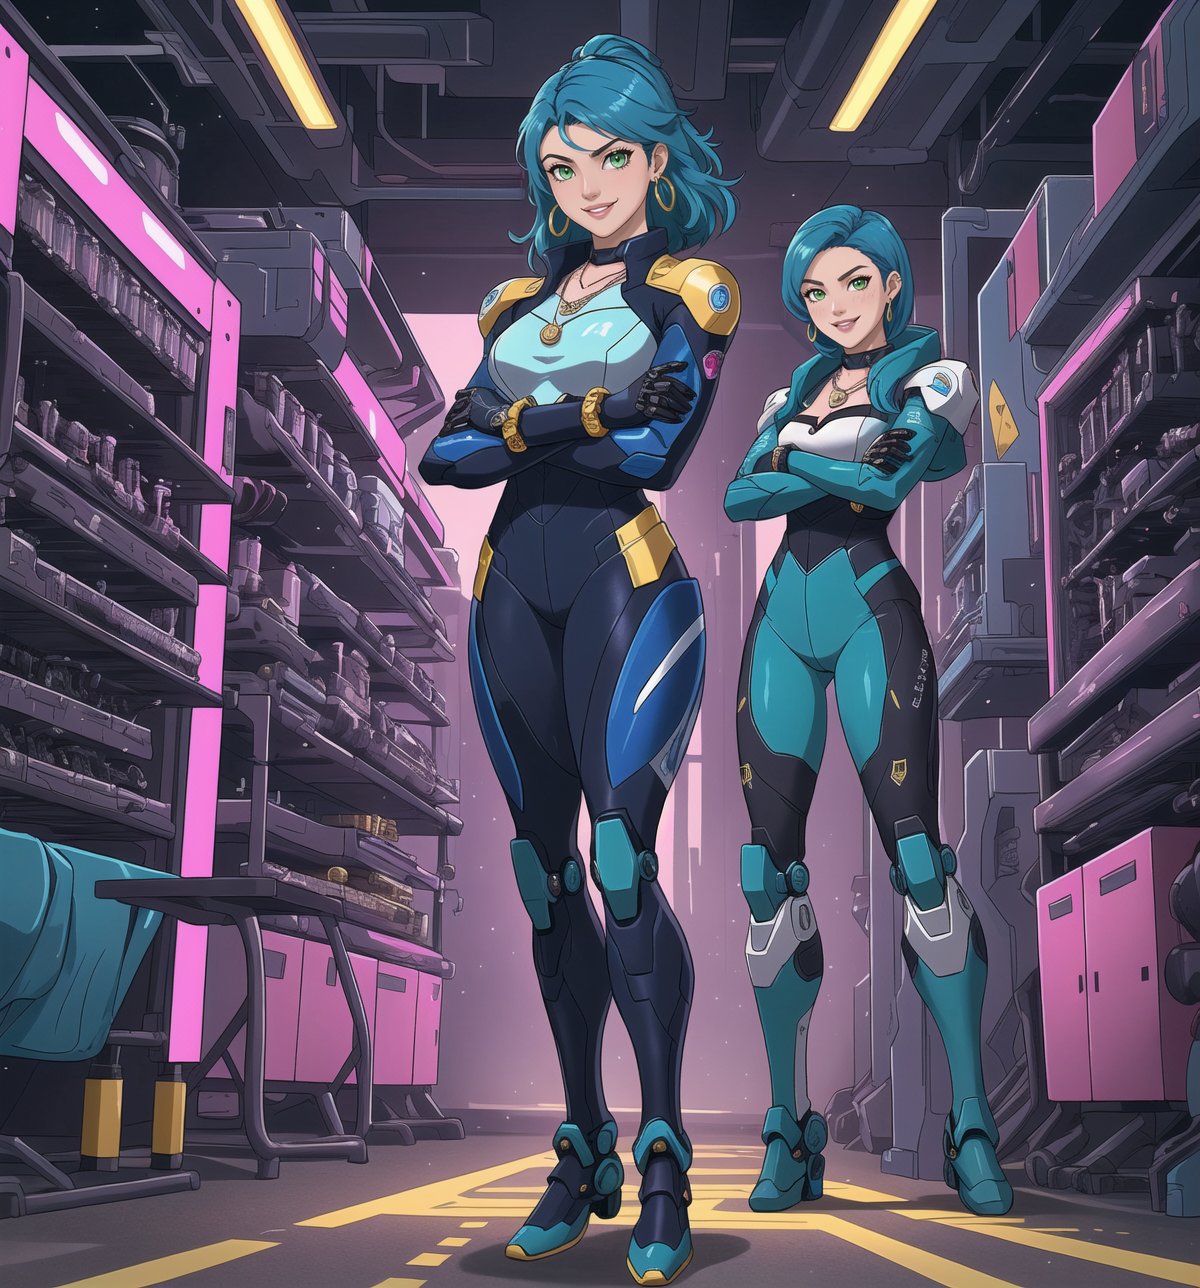 A masterpiece of digital art in the styles of Adventure, Science Fiction, Mecha, Technology, and Futurism. | Sakura, a 28-year-old woman, wears a silver and blue mecha suit. The suit has a futuristic and elegant design, highlighting her athletic and muscular figure. She also wears a pair of gold earrings with gear-shaped pendants, a silver necklace with a triangle-shaped pendant, black leather bracelets on her hands, and a gold ring with a small sapphire on her left hand. Her short, modern blue hair is styled to the side, framing her pretty and determined face. Her green eyes shine with confidence and intelligence, as she smiles at the viewer, showing her bright, white teeth and lips painted in a dark shade of pink. She is in an ultra-technological laboratory, striking a confident and powerful pose. The location is illuminated by bright LED lights, with metal structures and high-tech machines and equipment scattered on the ground. The atmosphere is electrified and full of energy, with Sakura at the center of it all, ready to face any challenge. | (((((The image reveals a full-body shot as she assumes a confident pose, standing tall and proud in her mecha suit within the lab in an exciting manner. She takes on a confident pose as she interacts, boldly crossing her arms and smirking in an exciting way.))))). | ((full-body shot)), ((perfect pose)), ((perfect fingers, better hands, perfect hands)), ((perfect legs, perfect feet)), ((perfect design)), ((perfect composition)), ((very detailed scene, very detailed background, perfect layout, correct imperfections)), More Detail, Enhance, 